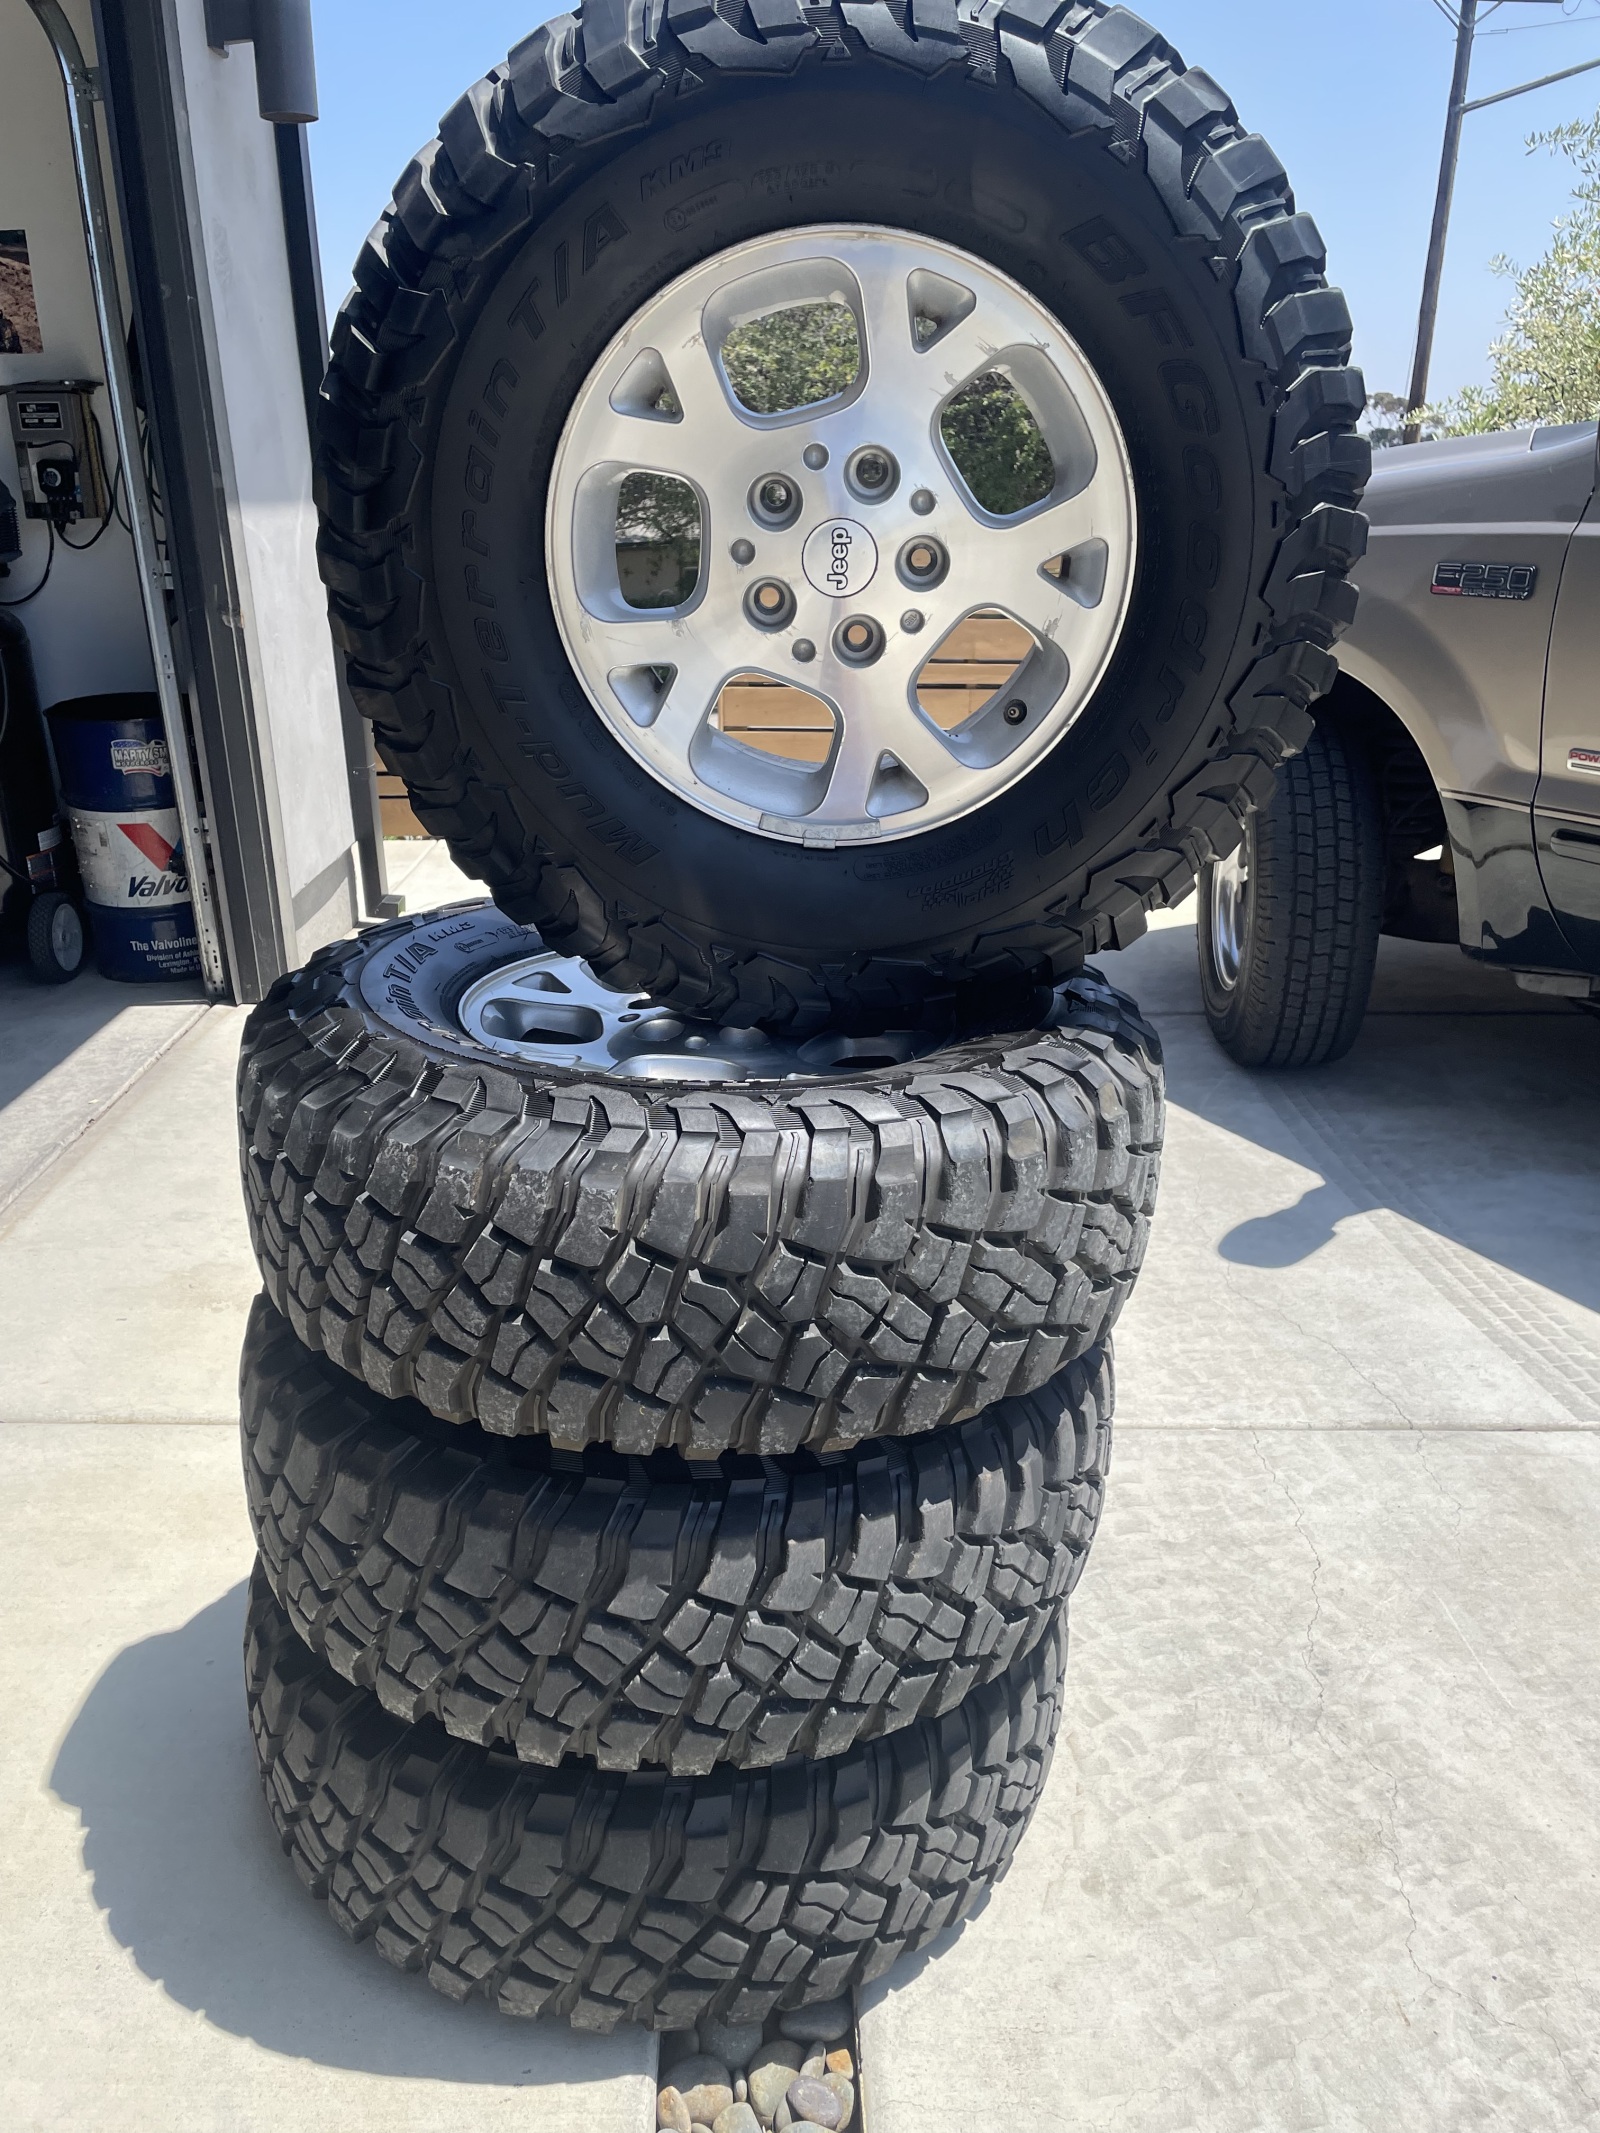 For Sale: 4 BFG Mud Terrain KM3 Tires on jeep wheels 265/75/16 600 miles on them max - photo0